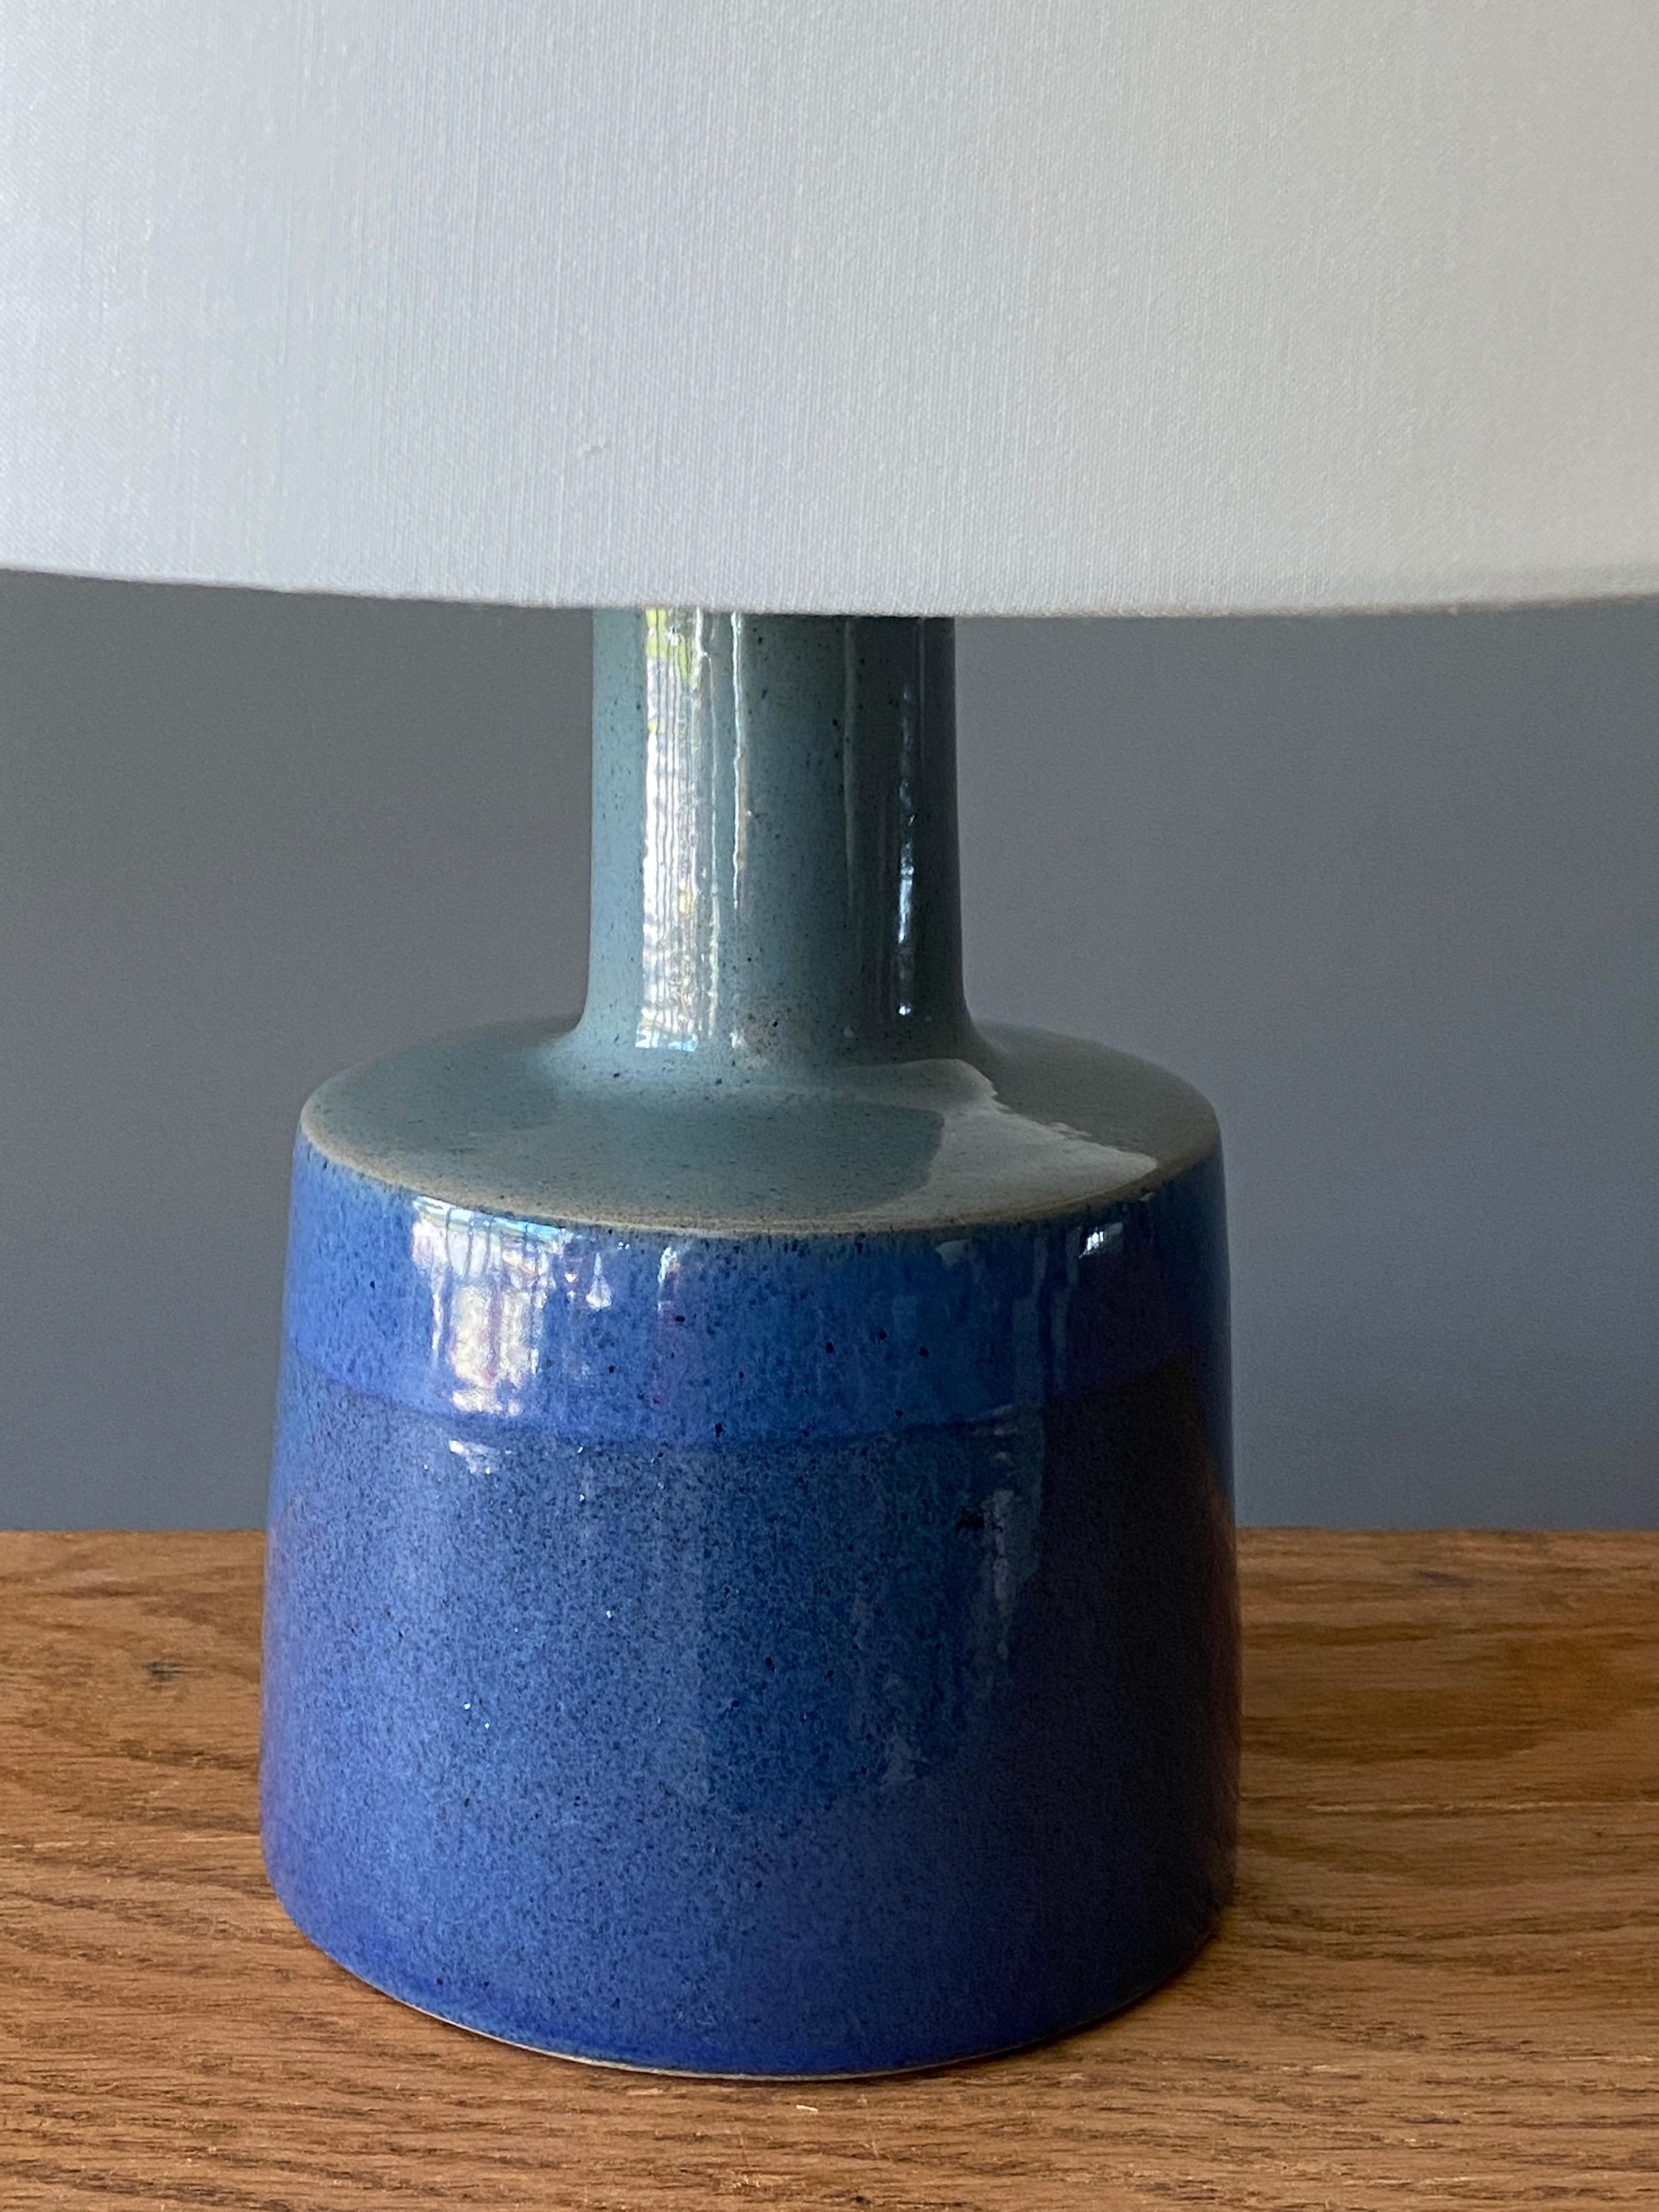 A table lamp designed by husband and wife duo Jane & Gordon Martz. Produced by Marshall Studios, Indianapolis. 

The base is slip-cast and then dipped into glaze and hand-painted. Base is signed. Sold without lampshade.

Jane & Gordon Martz works